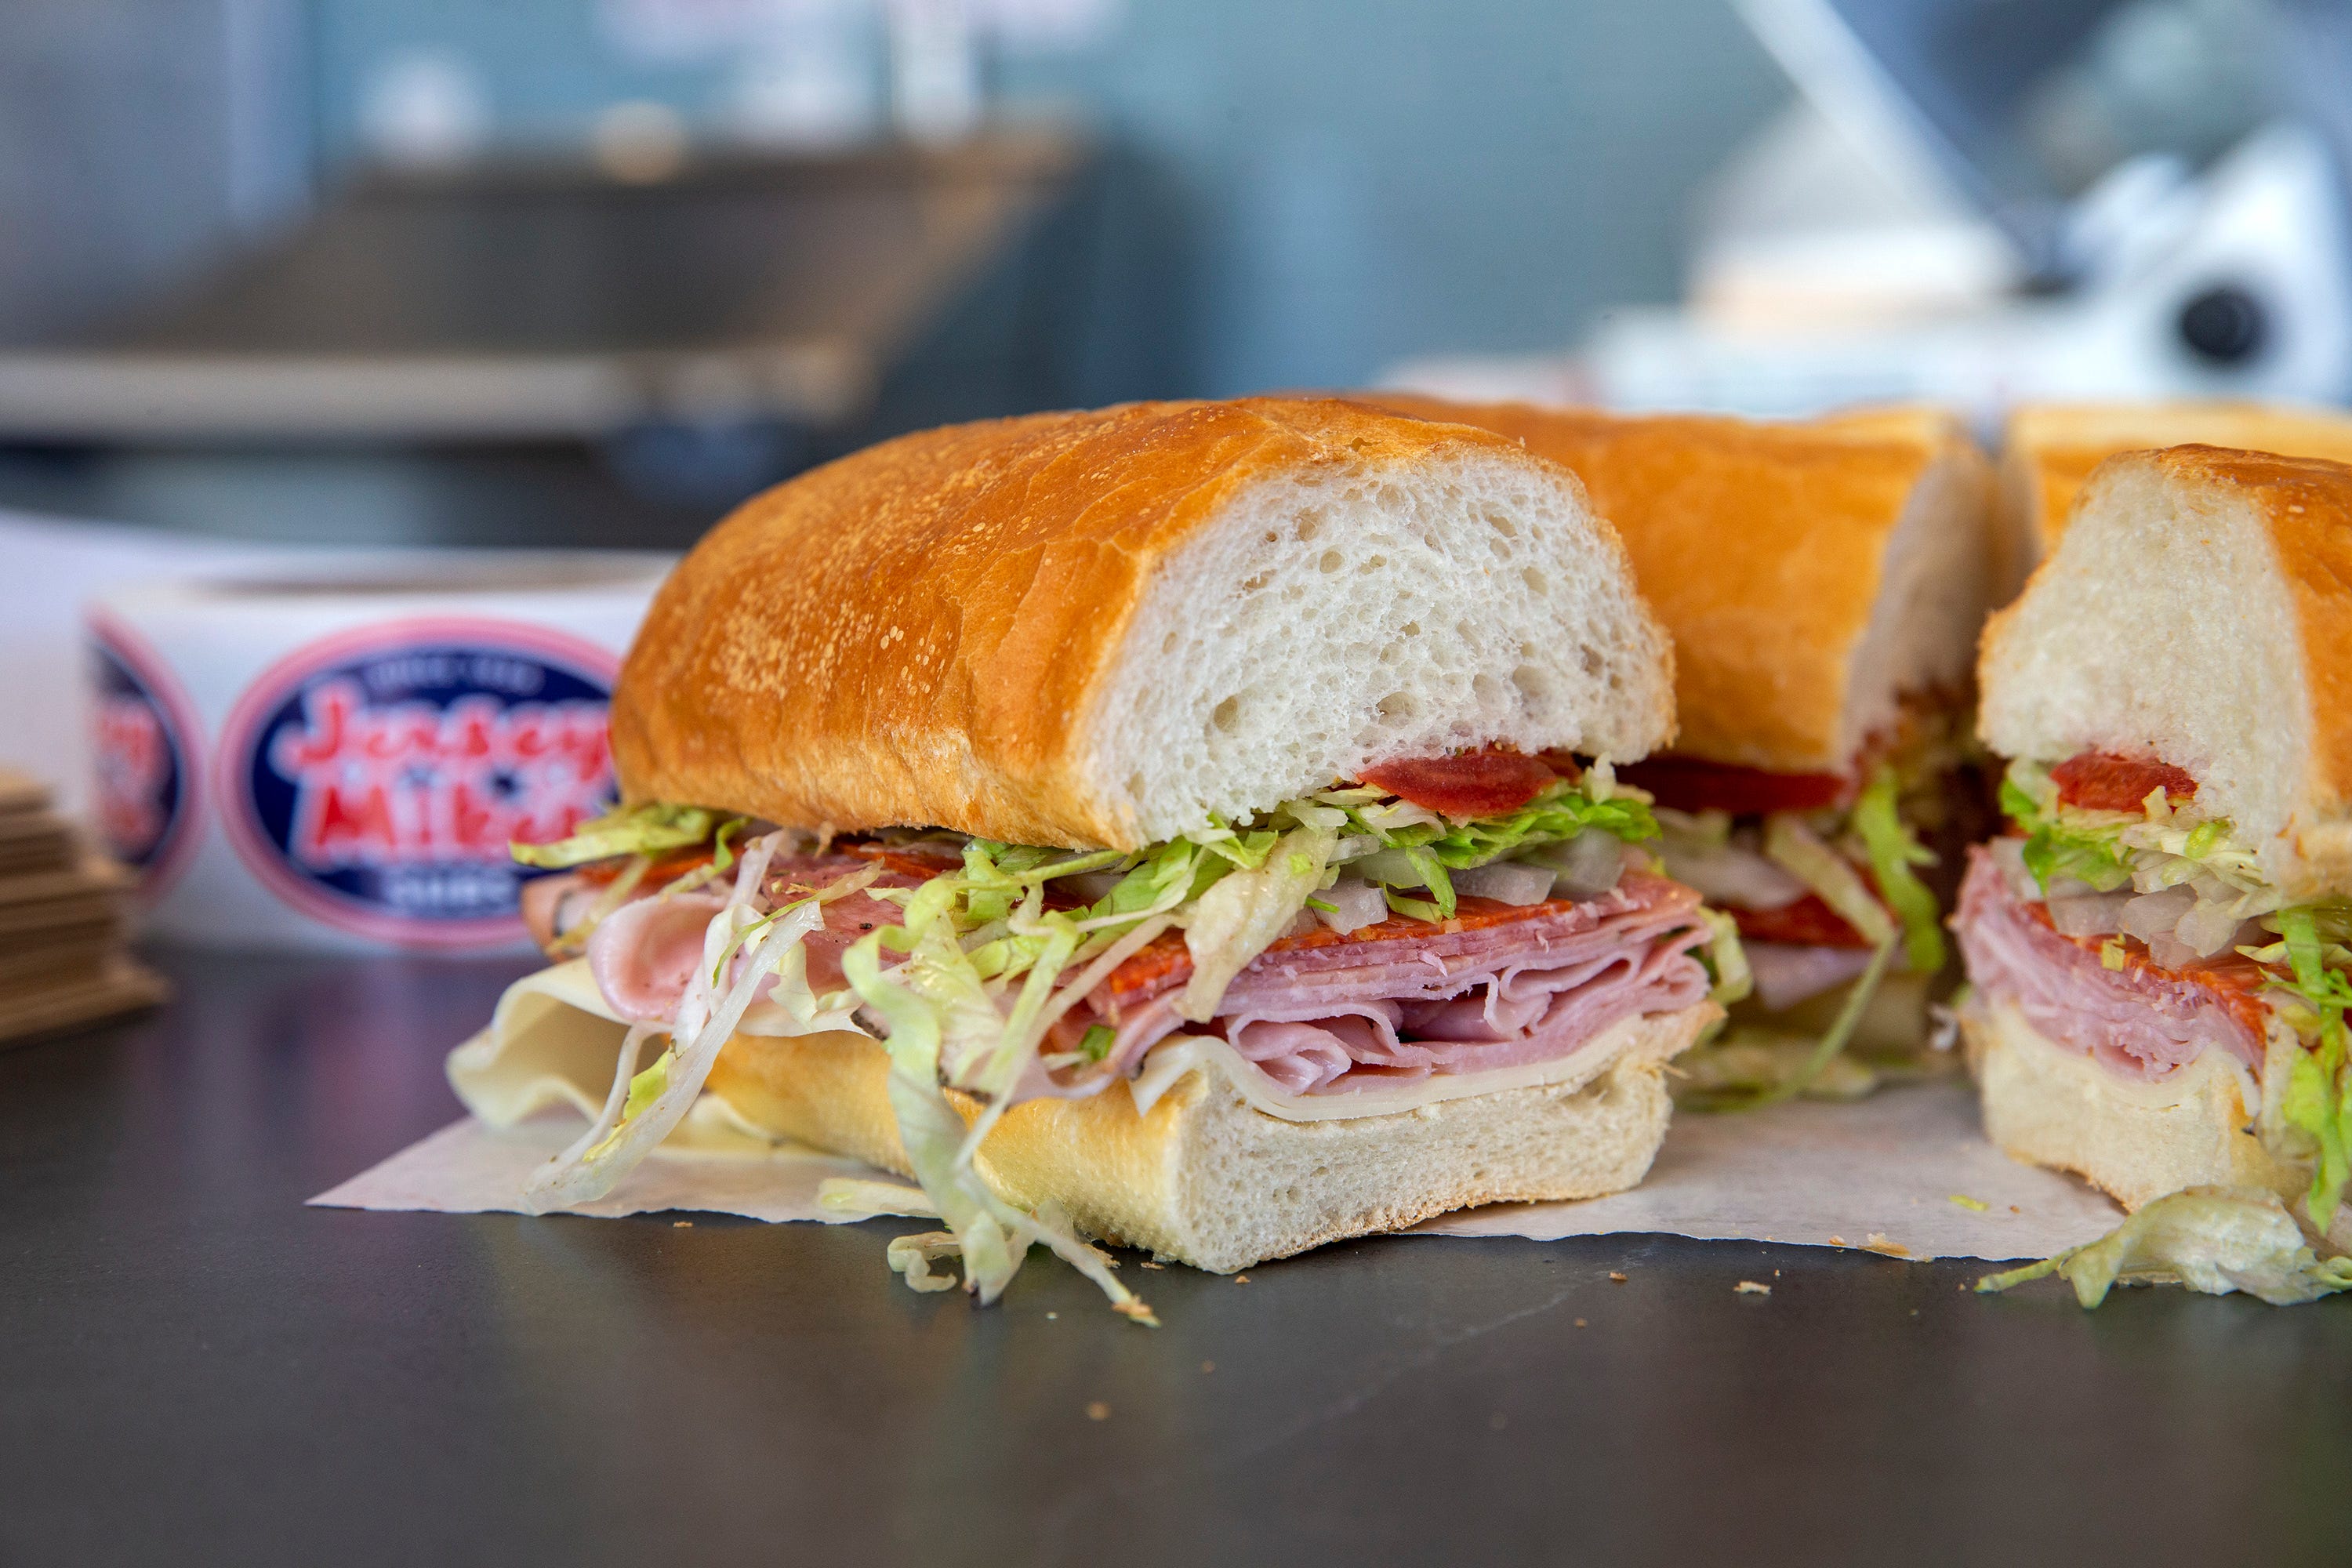 jersey mike's san diego locations